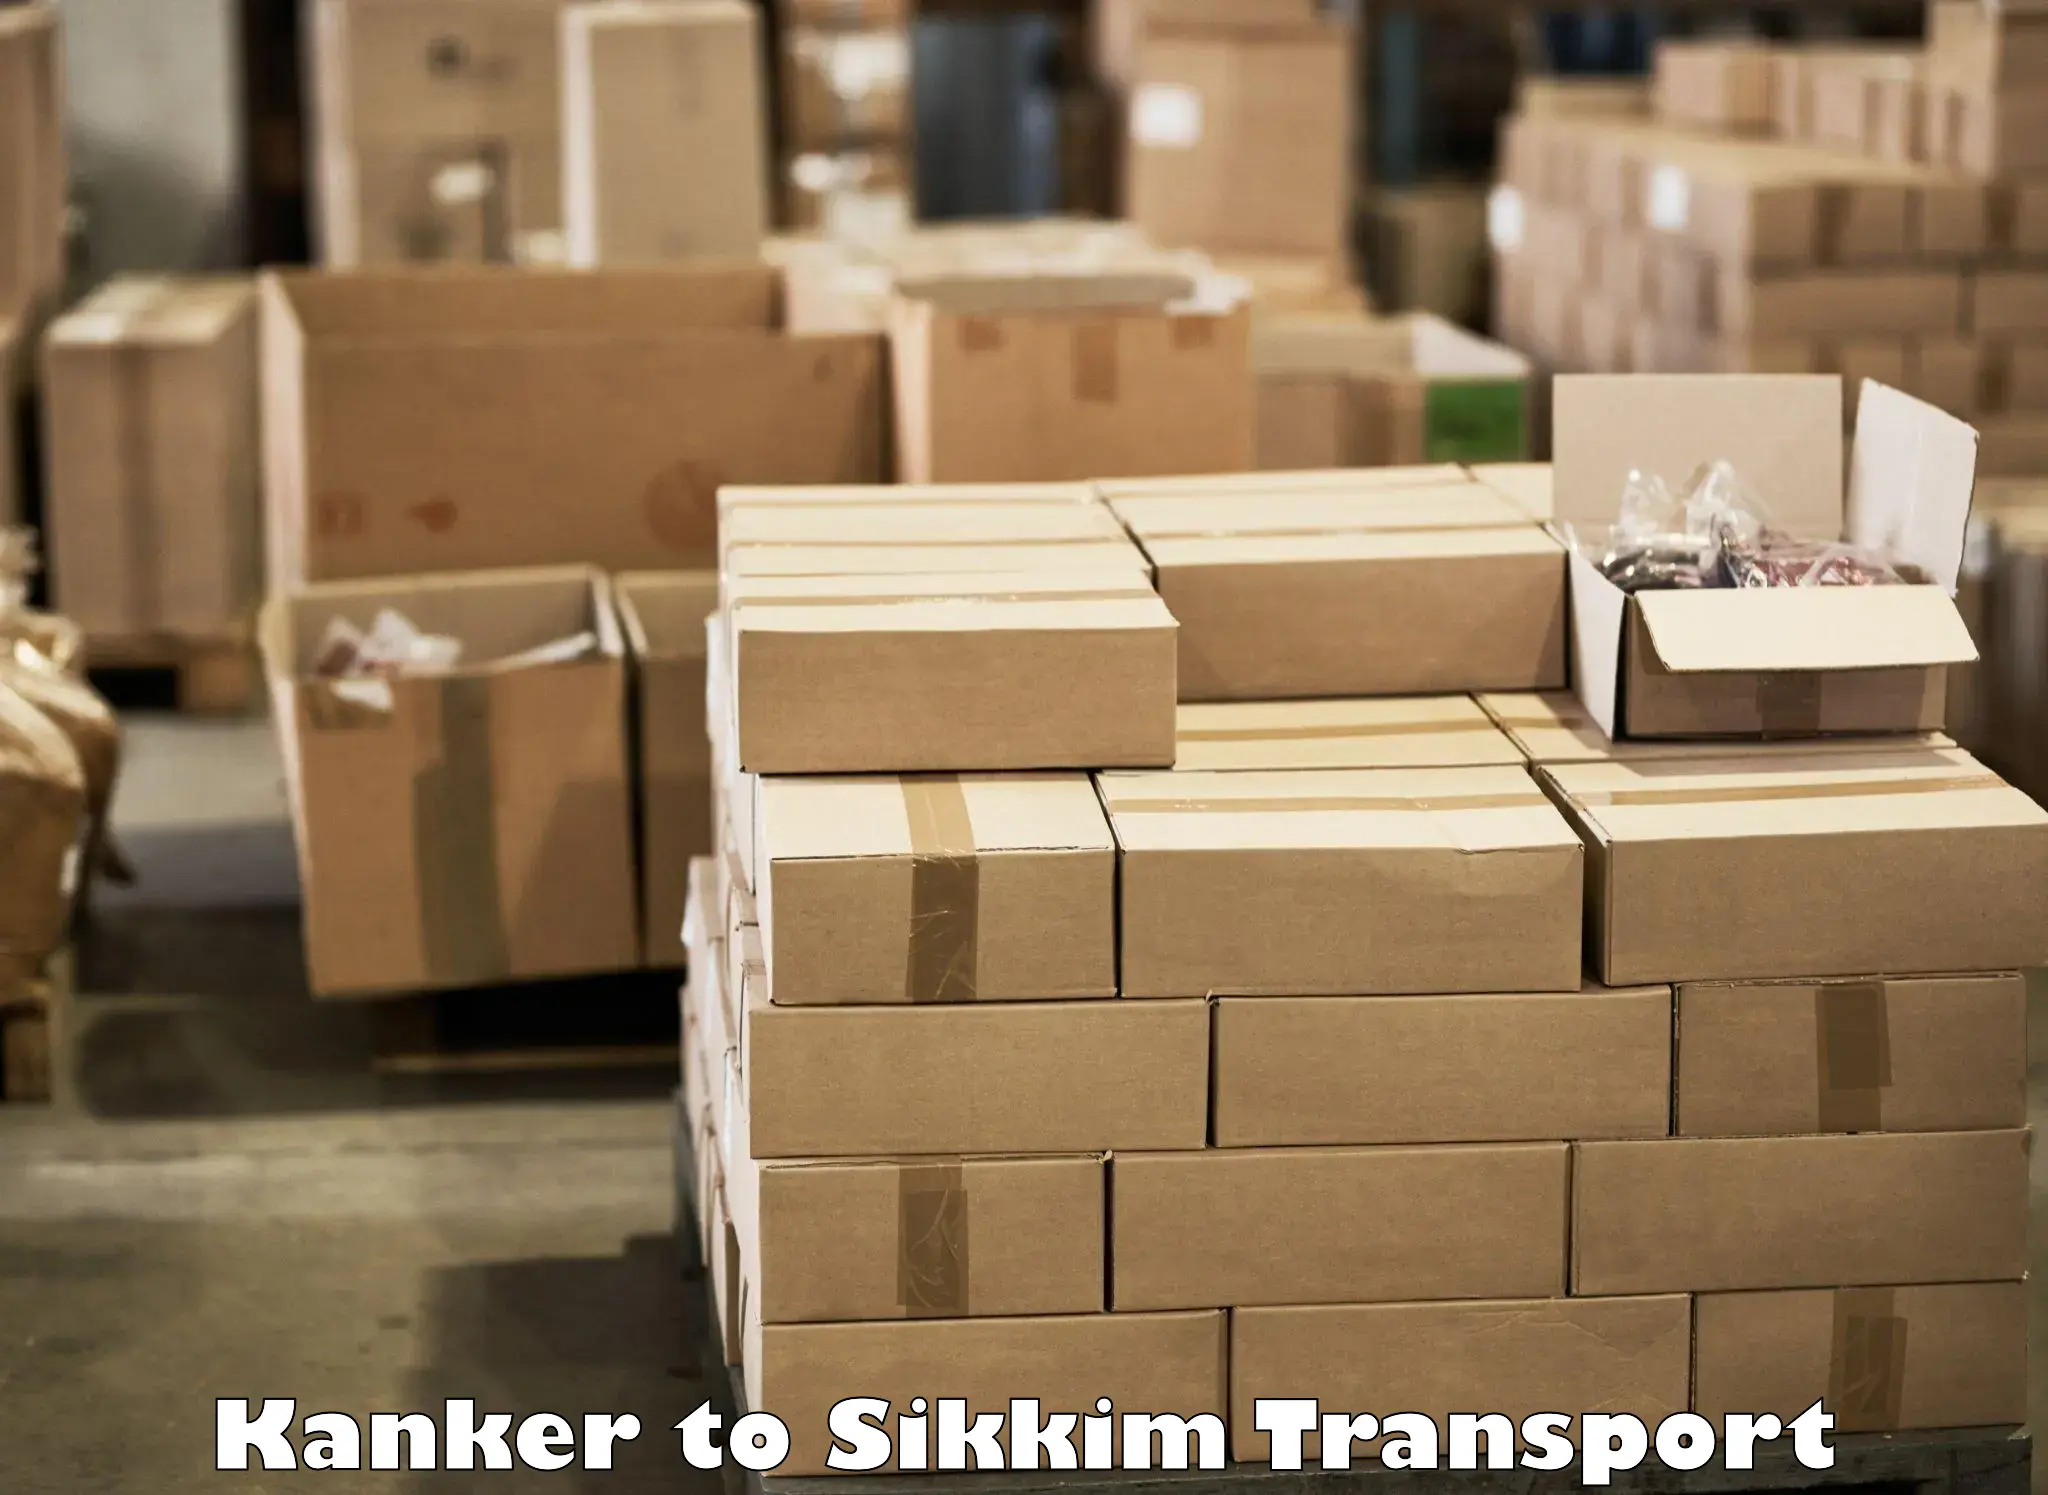 Daily transport service Kanker to Sikkim